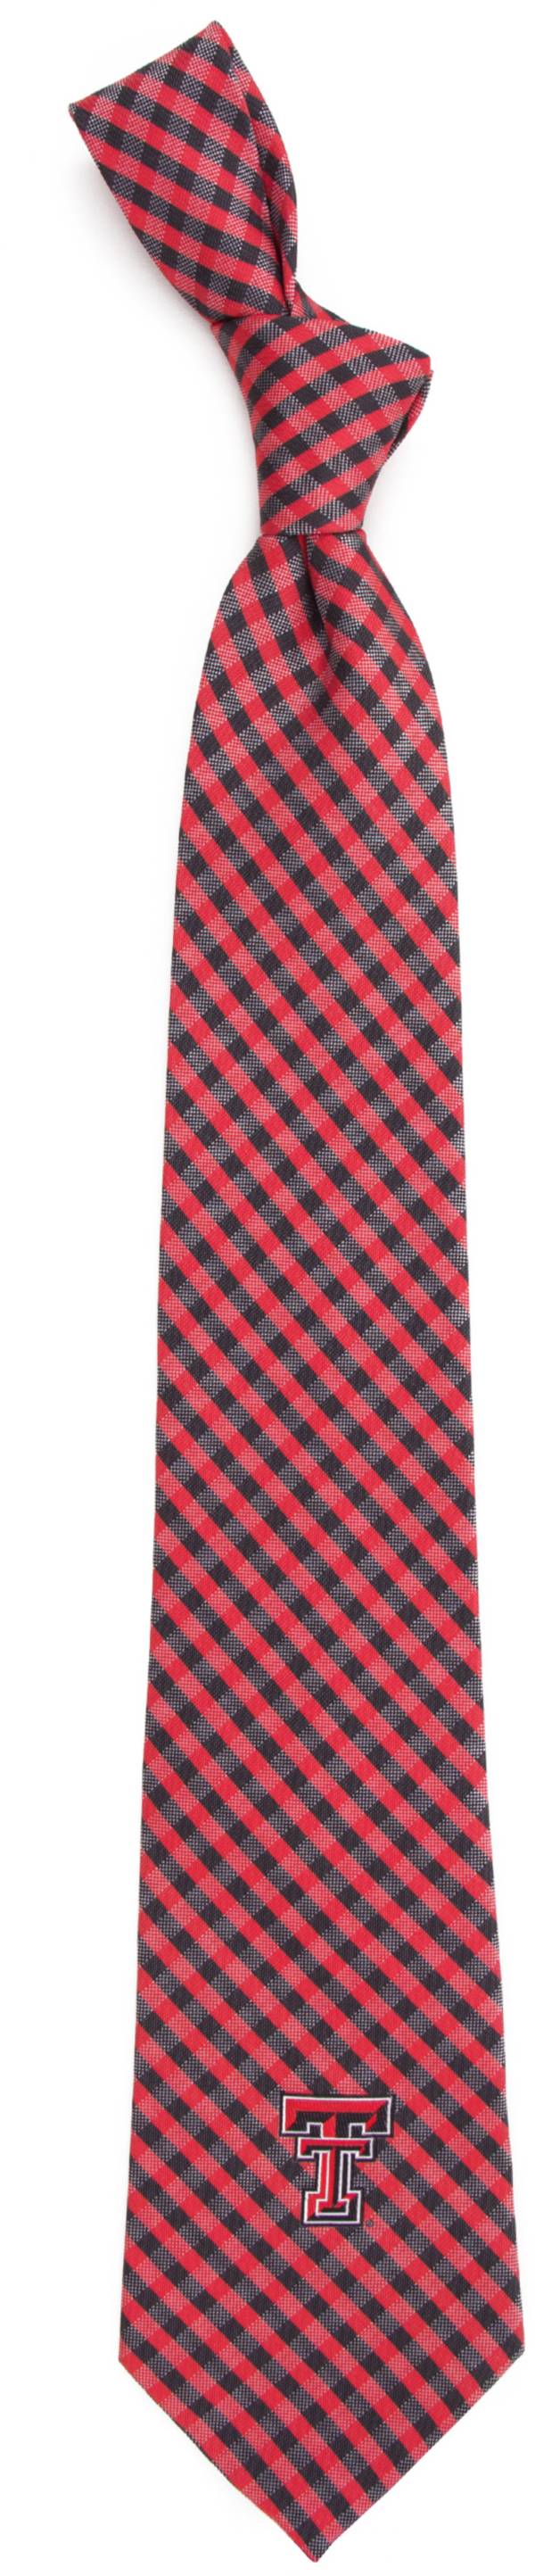 Eagles Wings Texas Tech Red Raiders Gingham Necktie product image